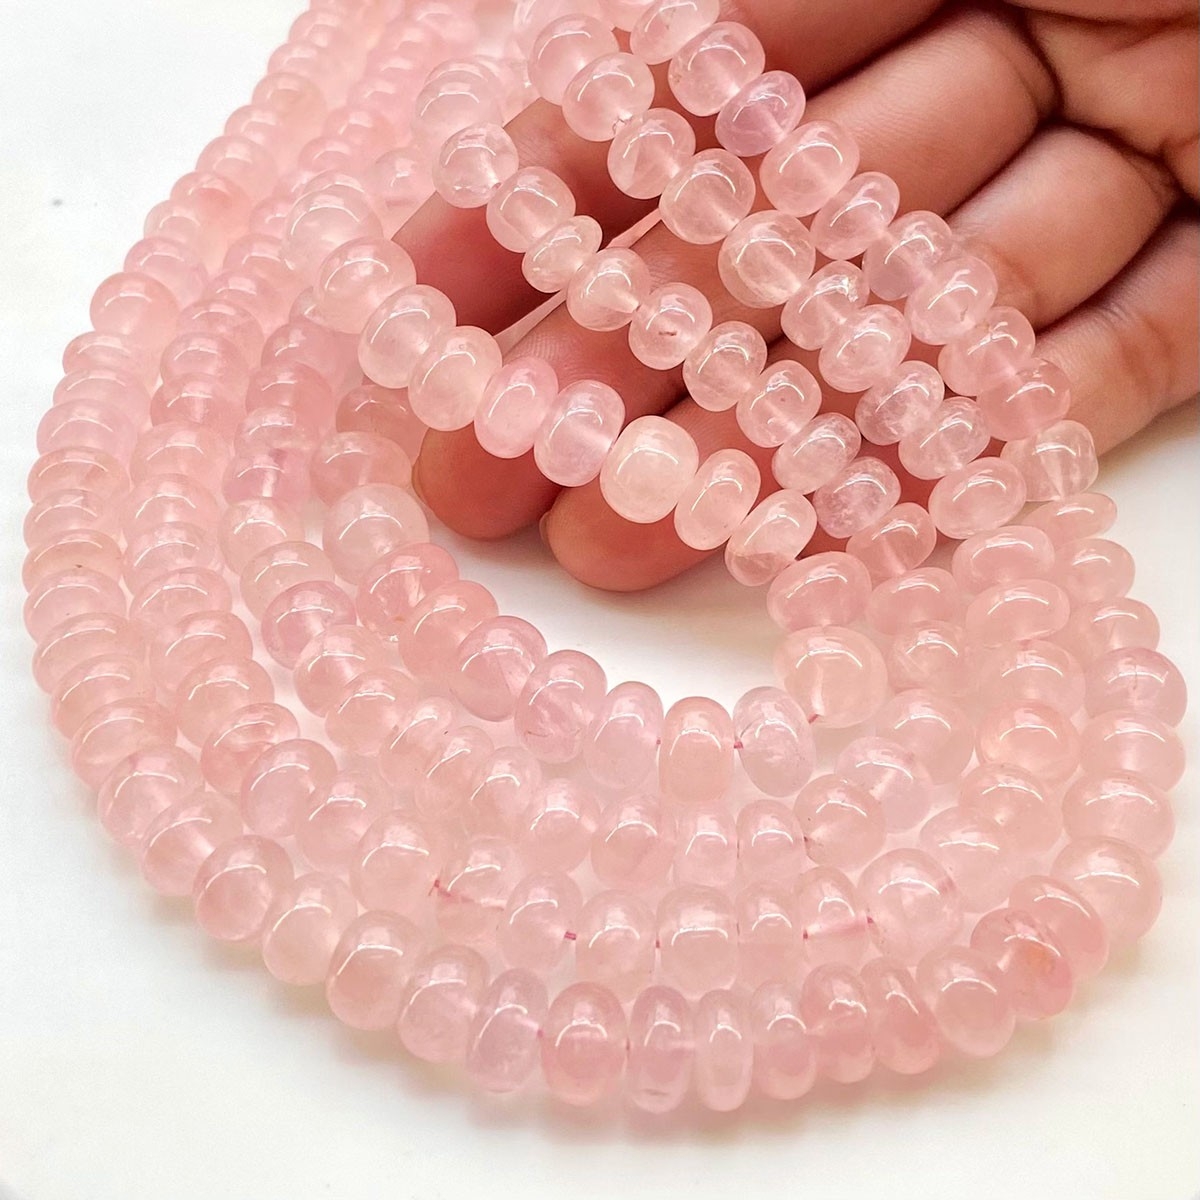 Bead, rose quartz (natural), 10mm rose-cut round, B grade, Mohs hardness 7.  Sold per 8-inch strand, approximately 20 beads. - Fire Mountain Gems and  Beads